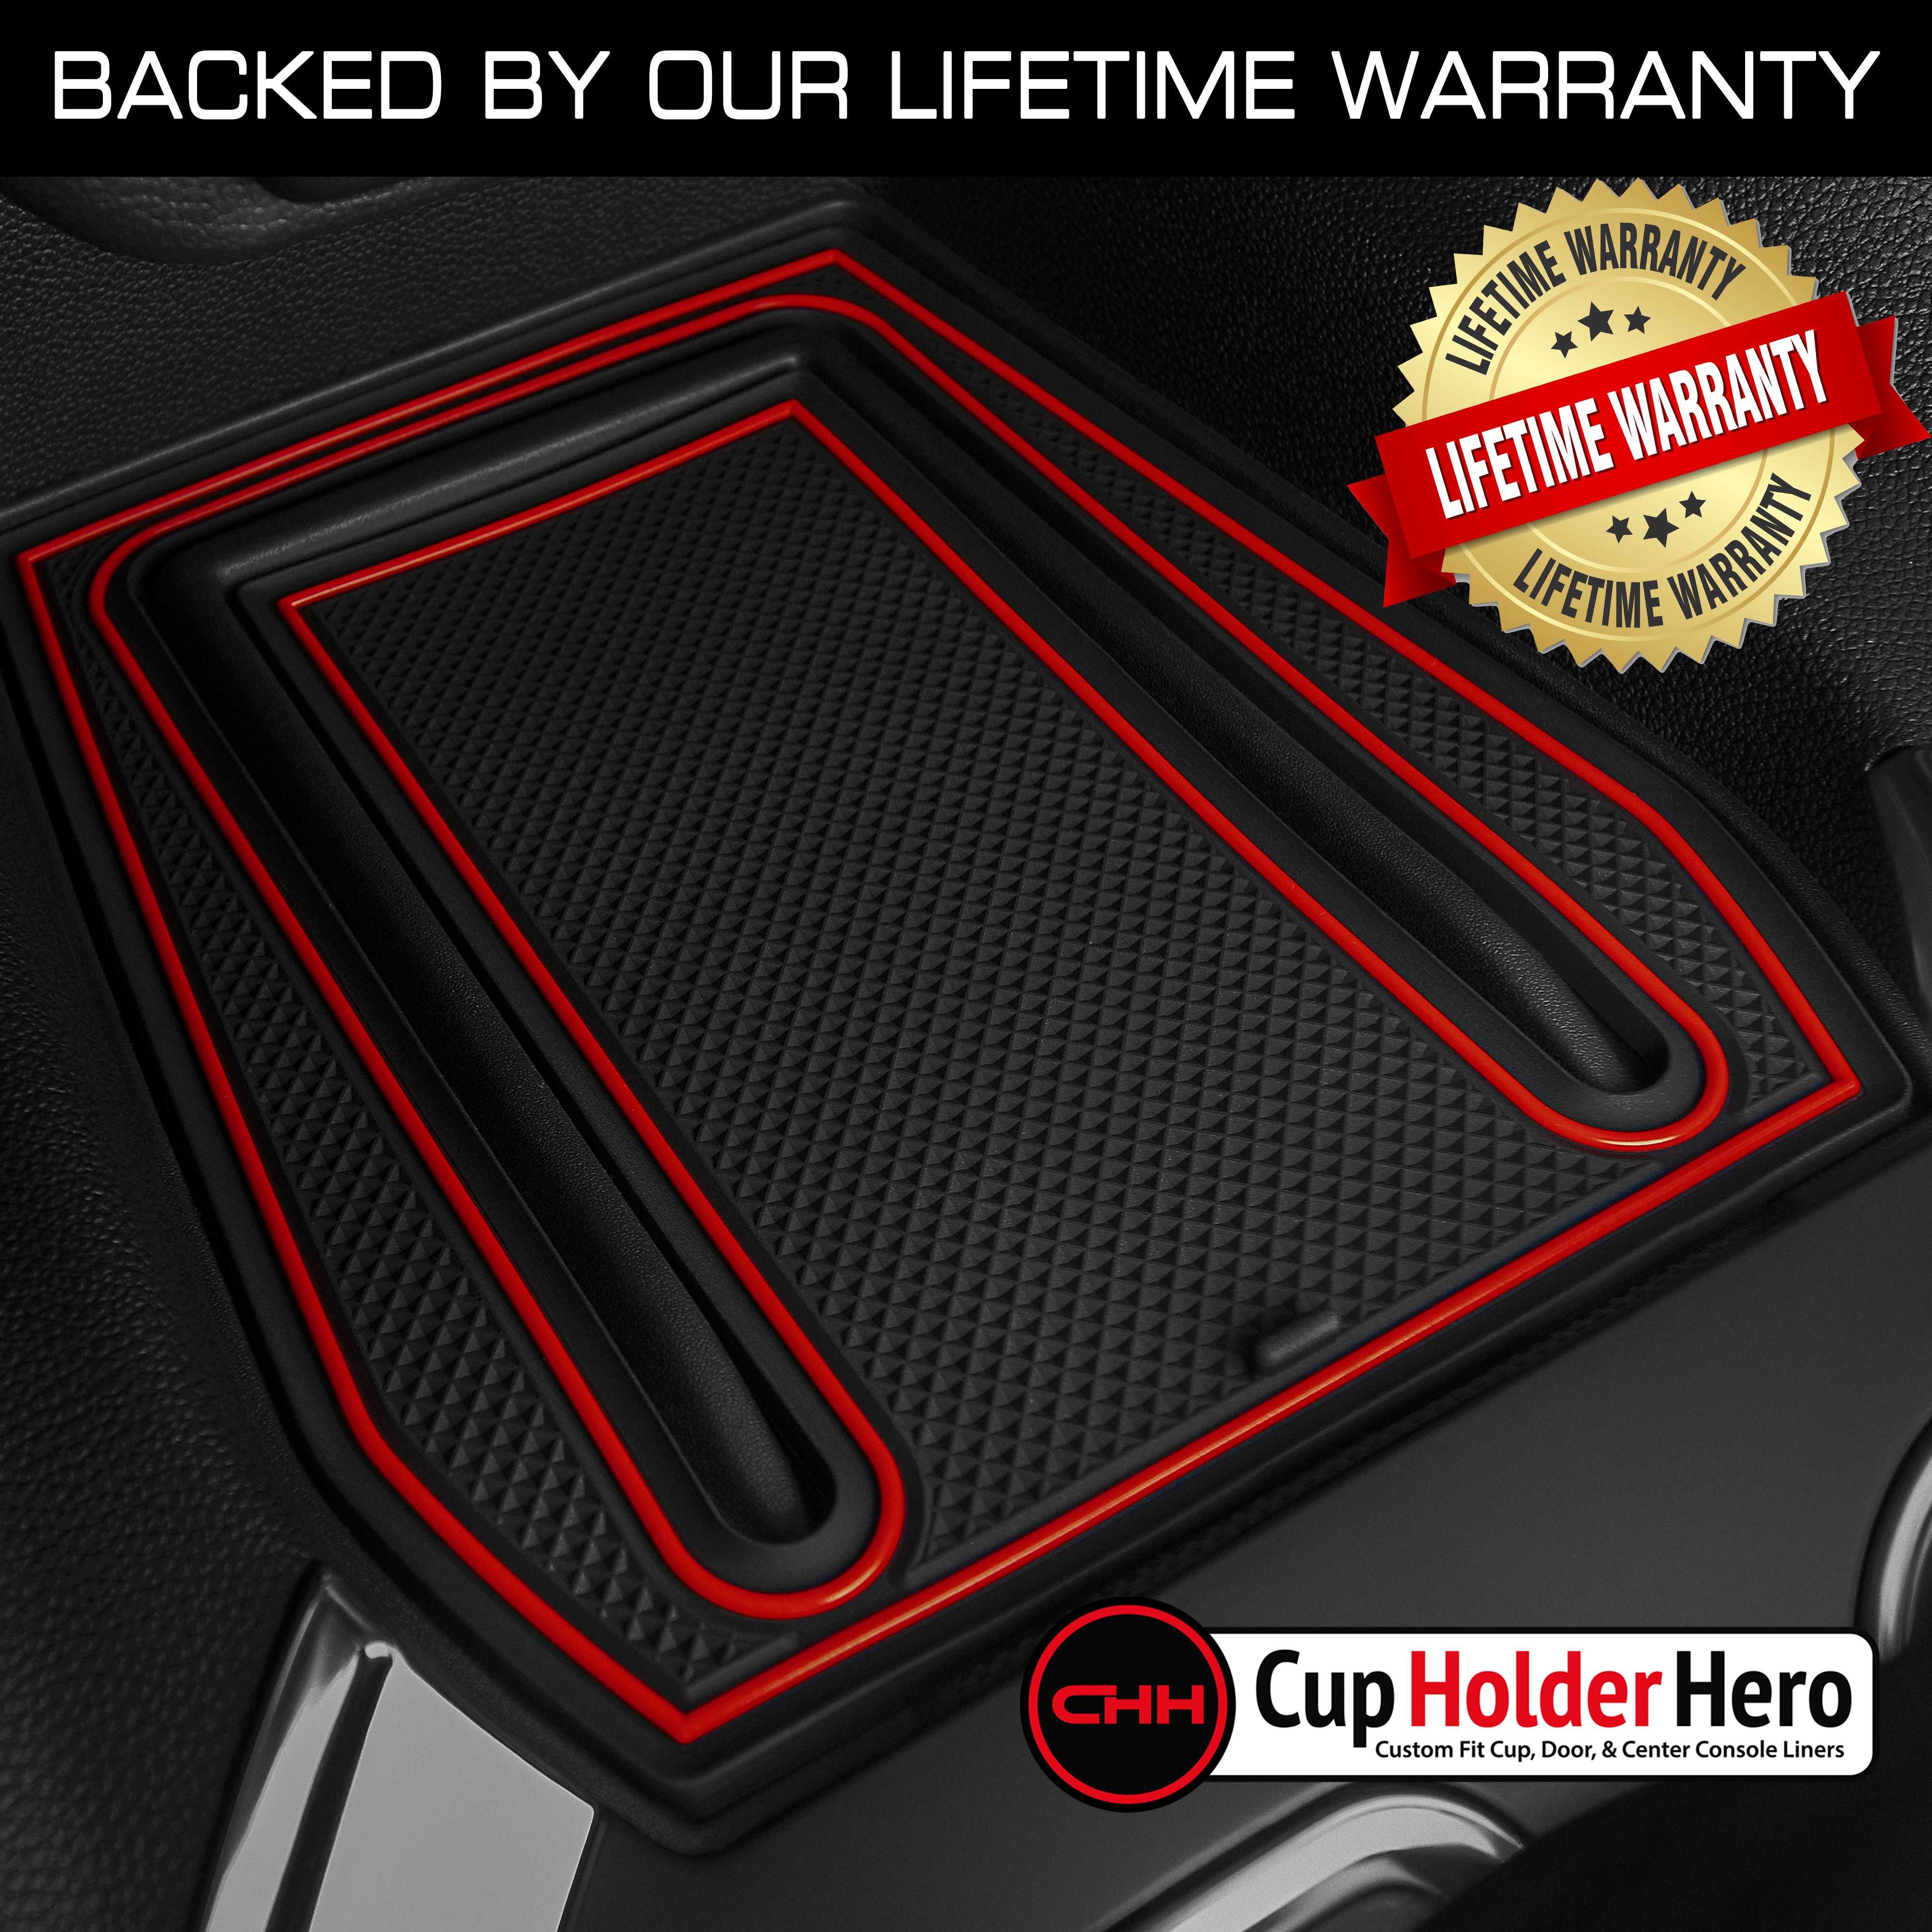 CupHolderHero for Chevy Traverse 20182022 Cup Holder Hero